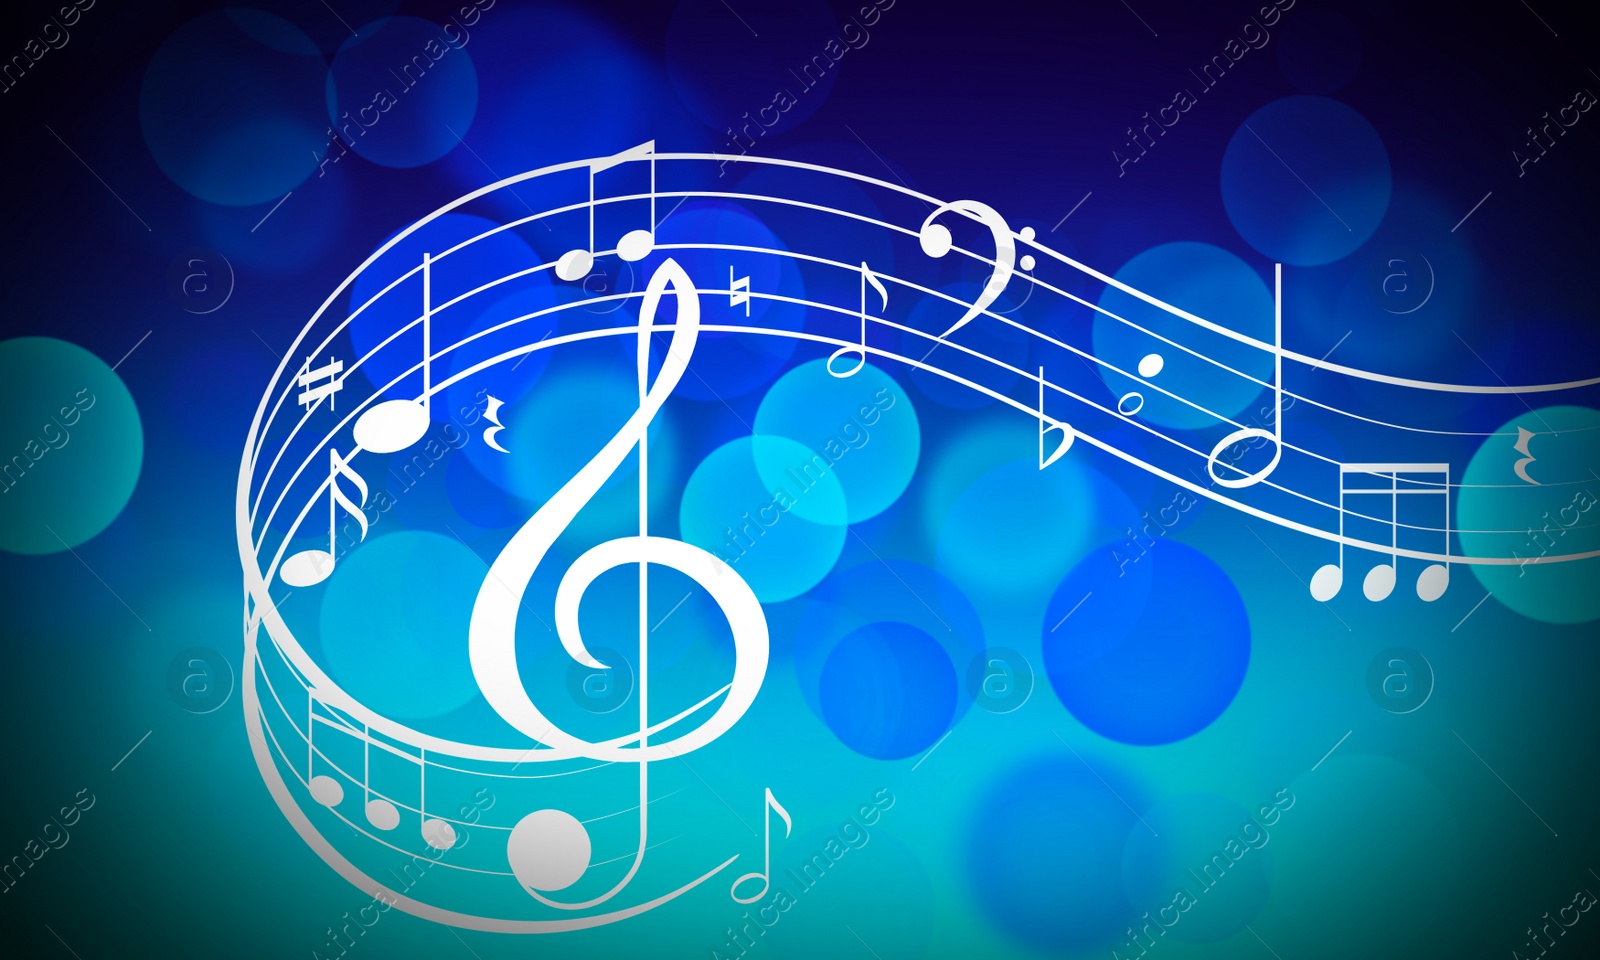 Illustration of Swirly staff with music notes and other musical symbols on color background